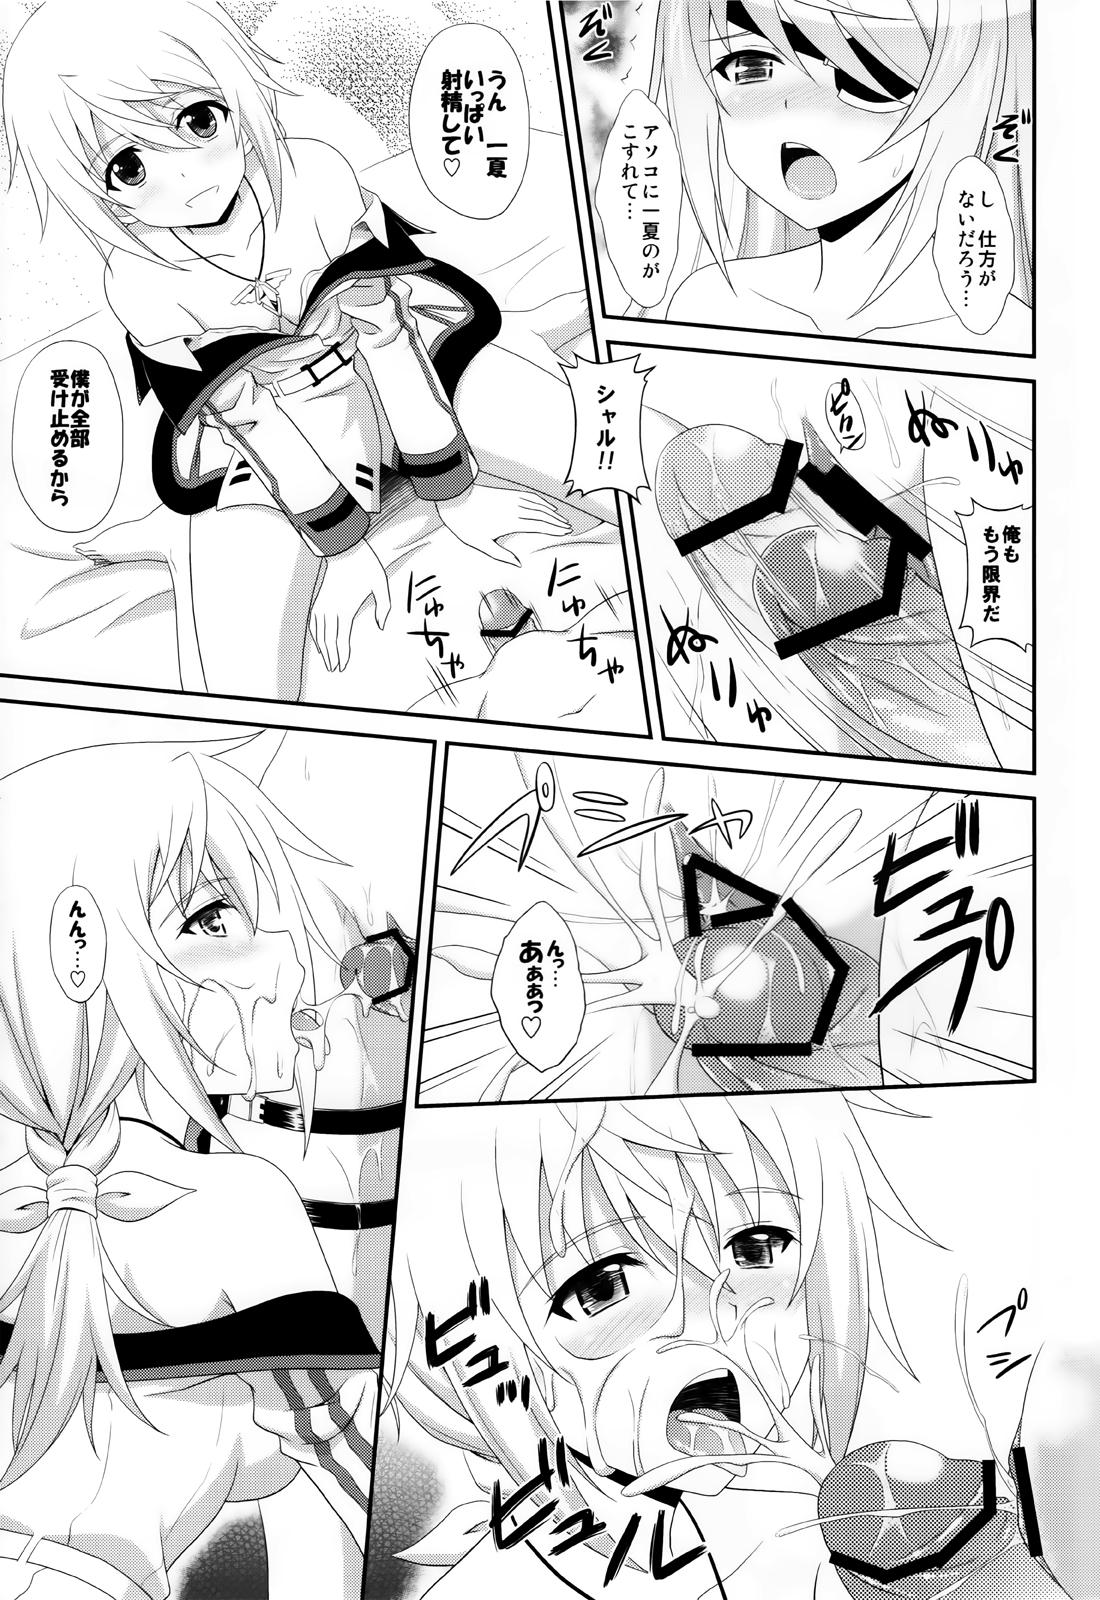 Doggy Style 1+1+1=∞ - Infinite stratos Cruising - Page 10